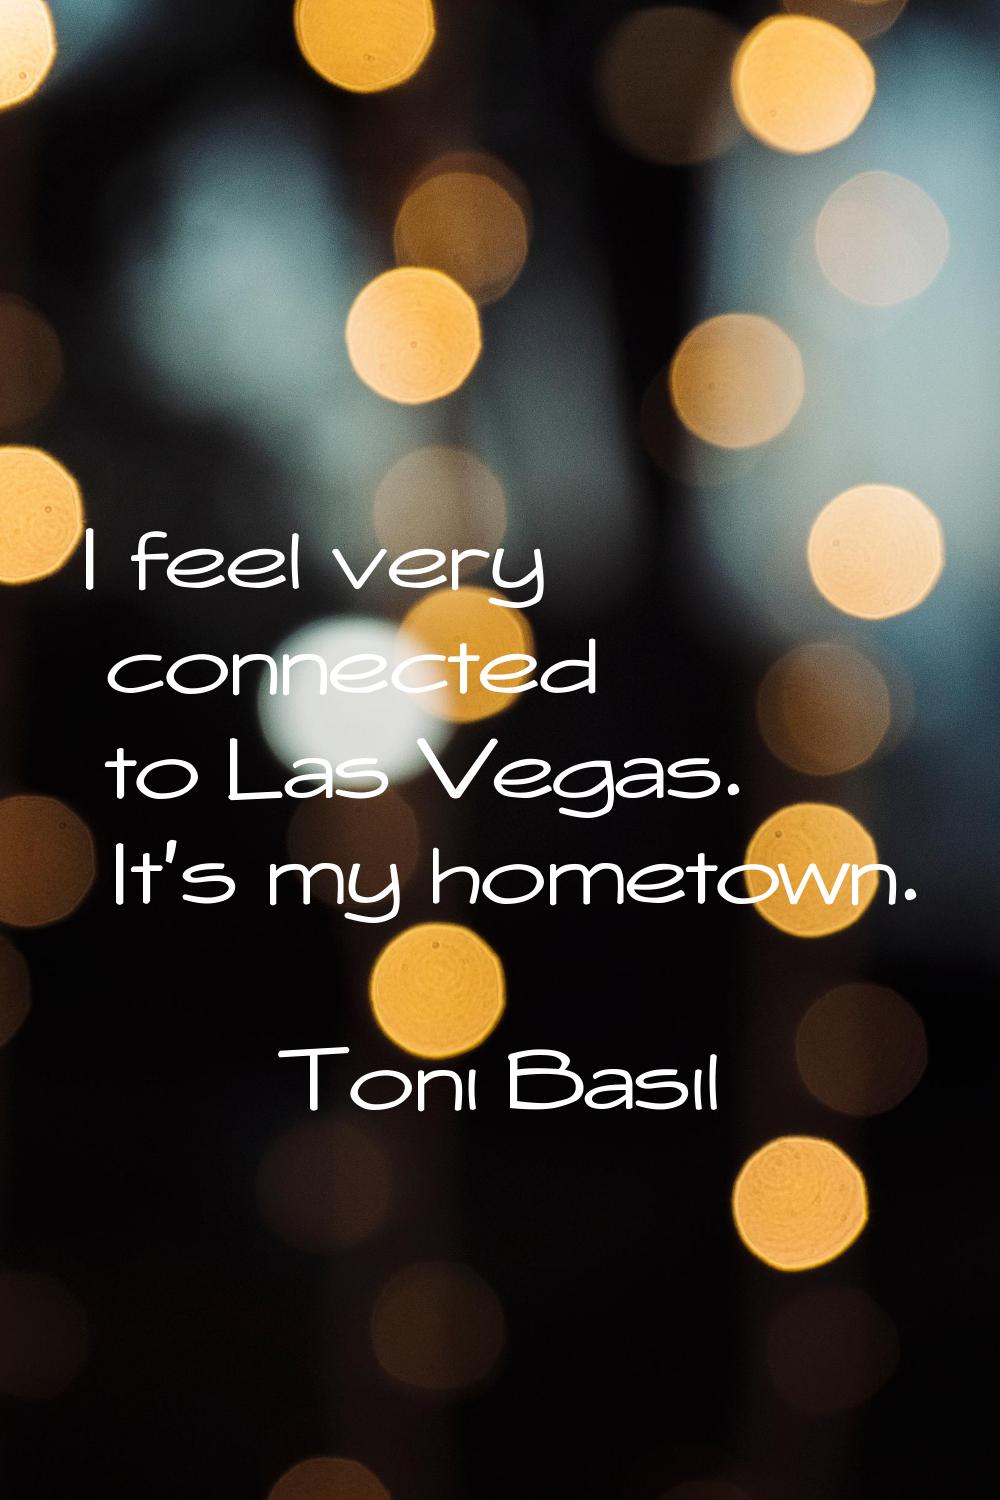 I feel very connected to Las Vegas. It's my hometown.